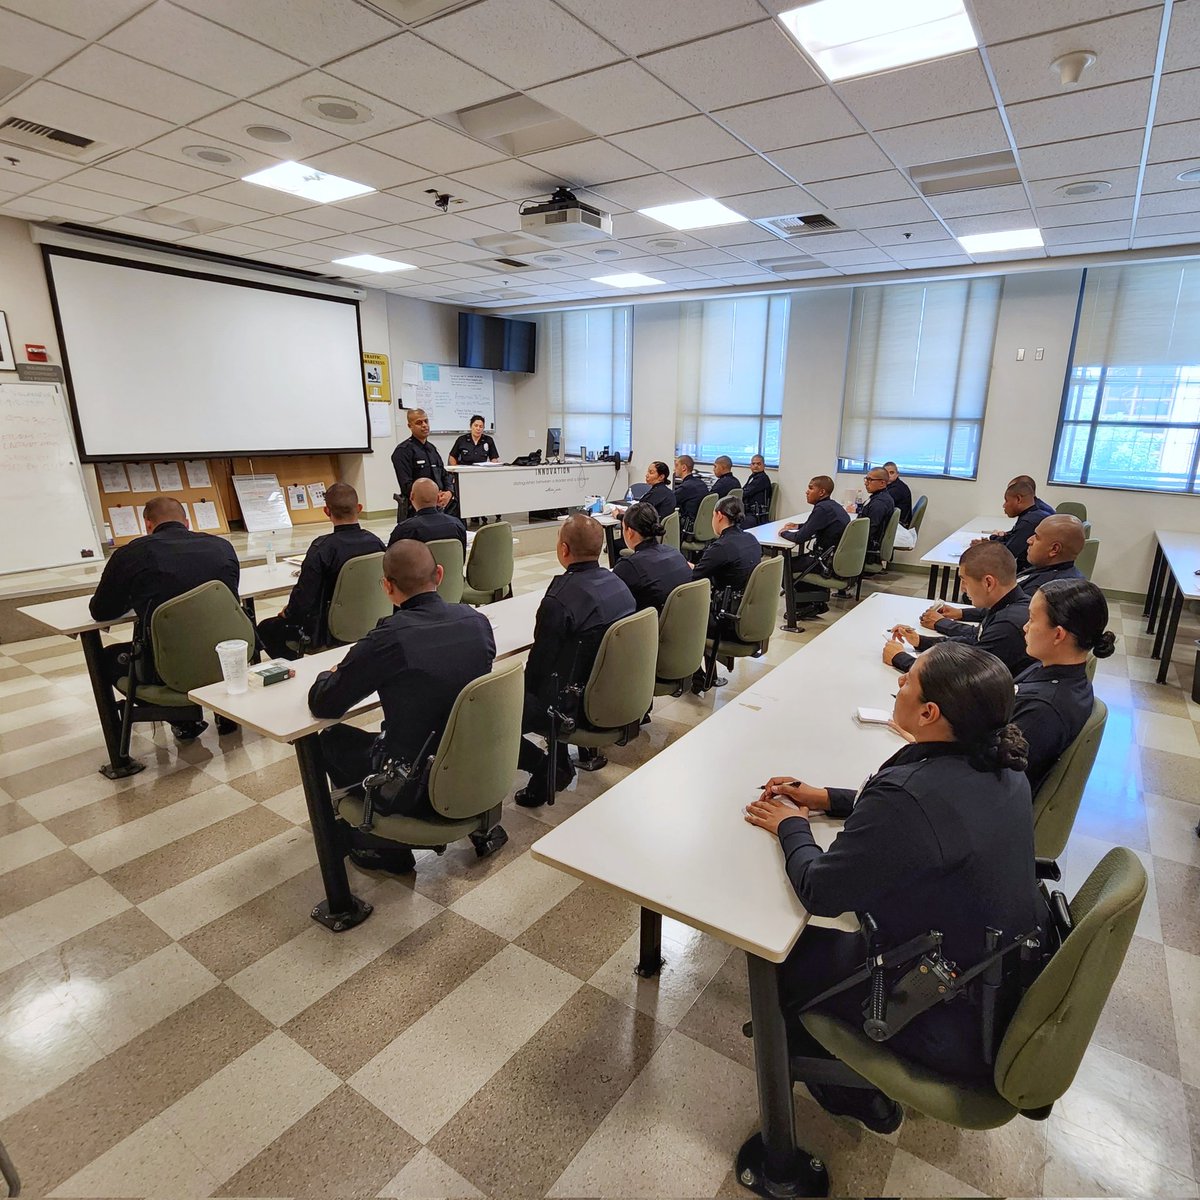 LAPD Academy class 1-22 one step closer to graduation. Today they attended a simulated roll call at a live police station to prepare for their first day next week. #lapdacademy #lapd #policetraining #careergoals #joinlapd #police